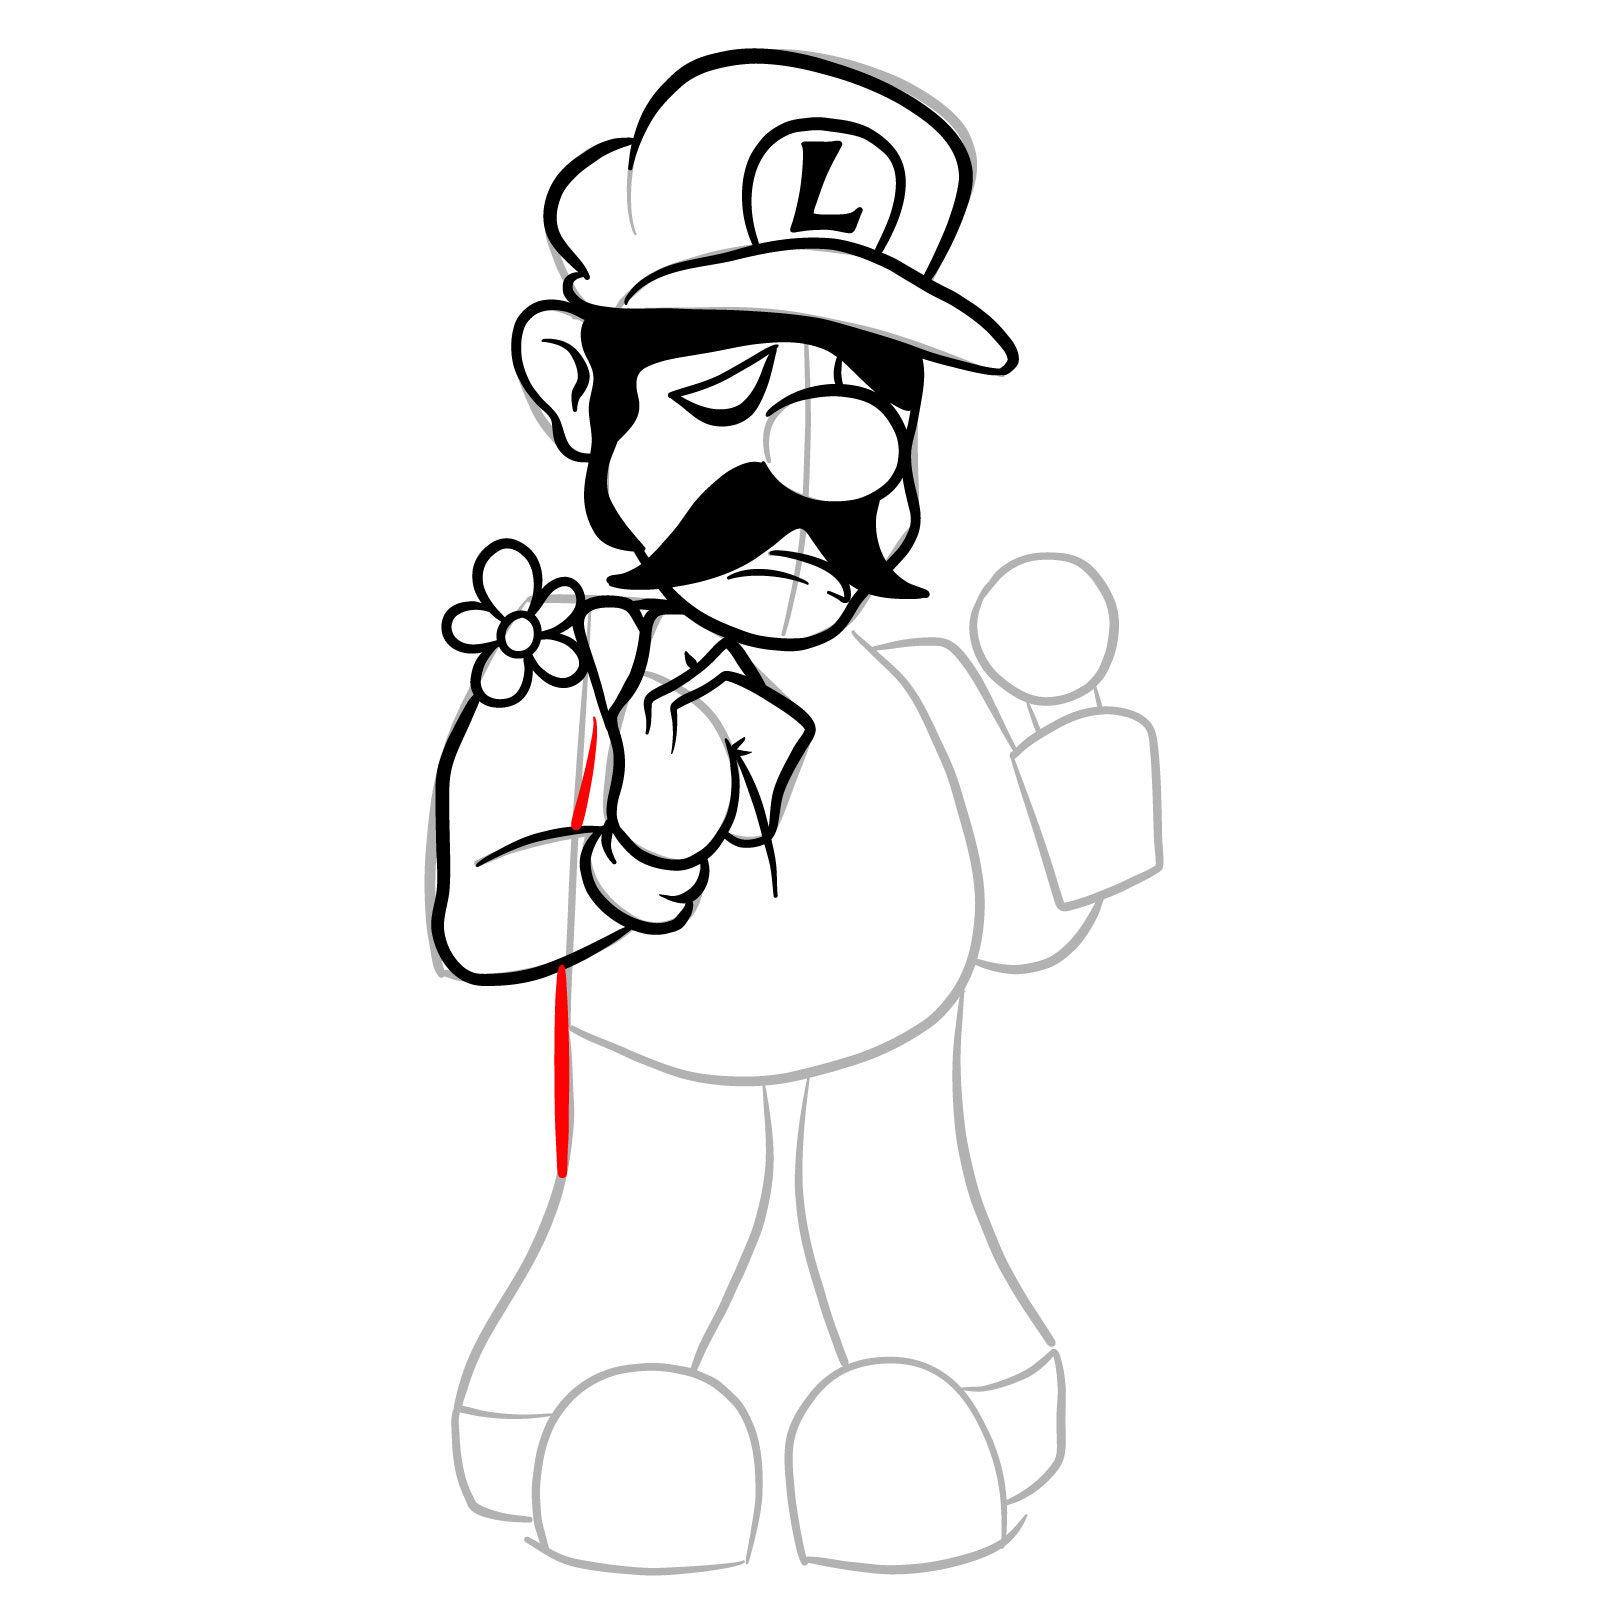 How to draw Beta Luigi from FNF - step 20